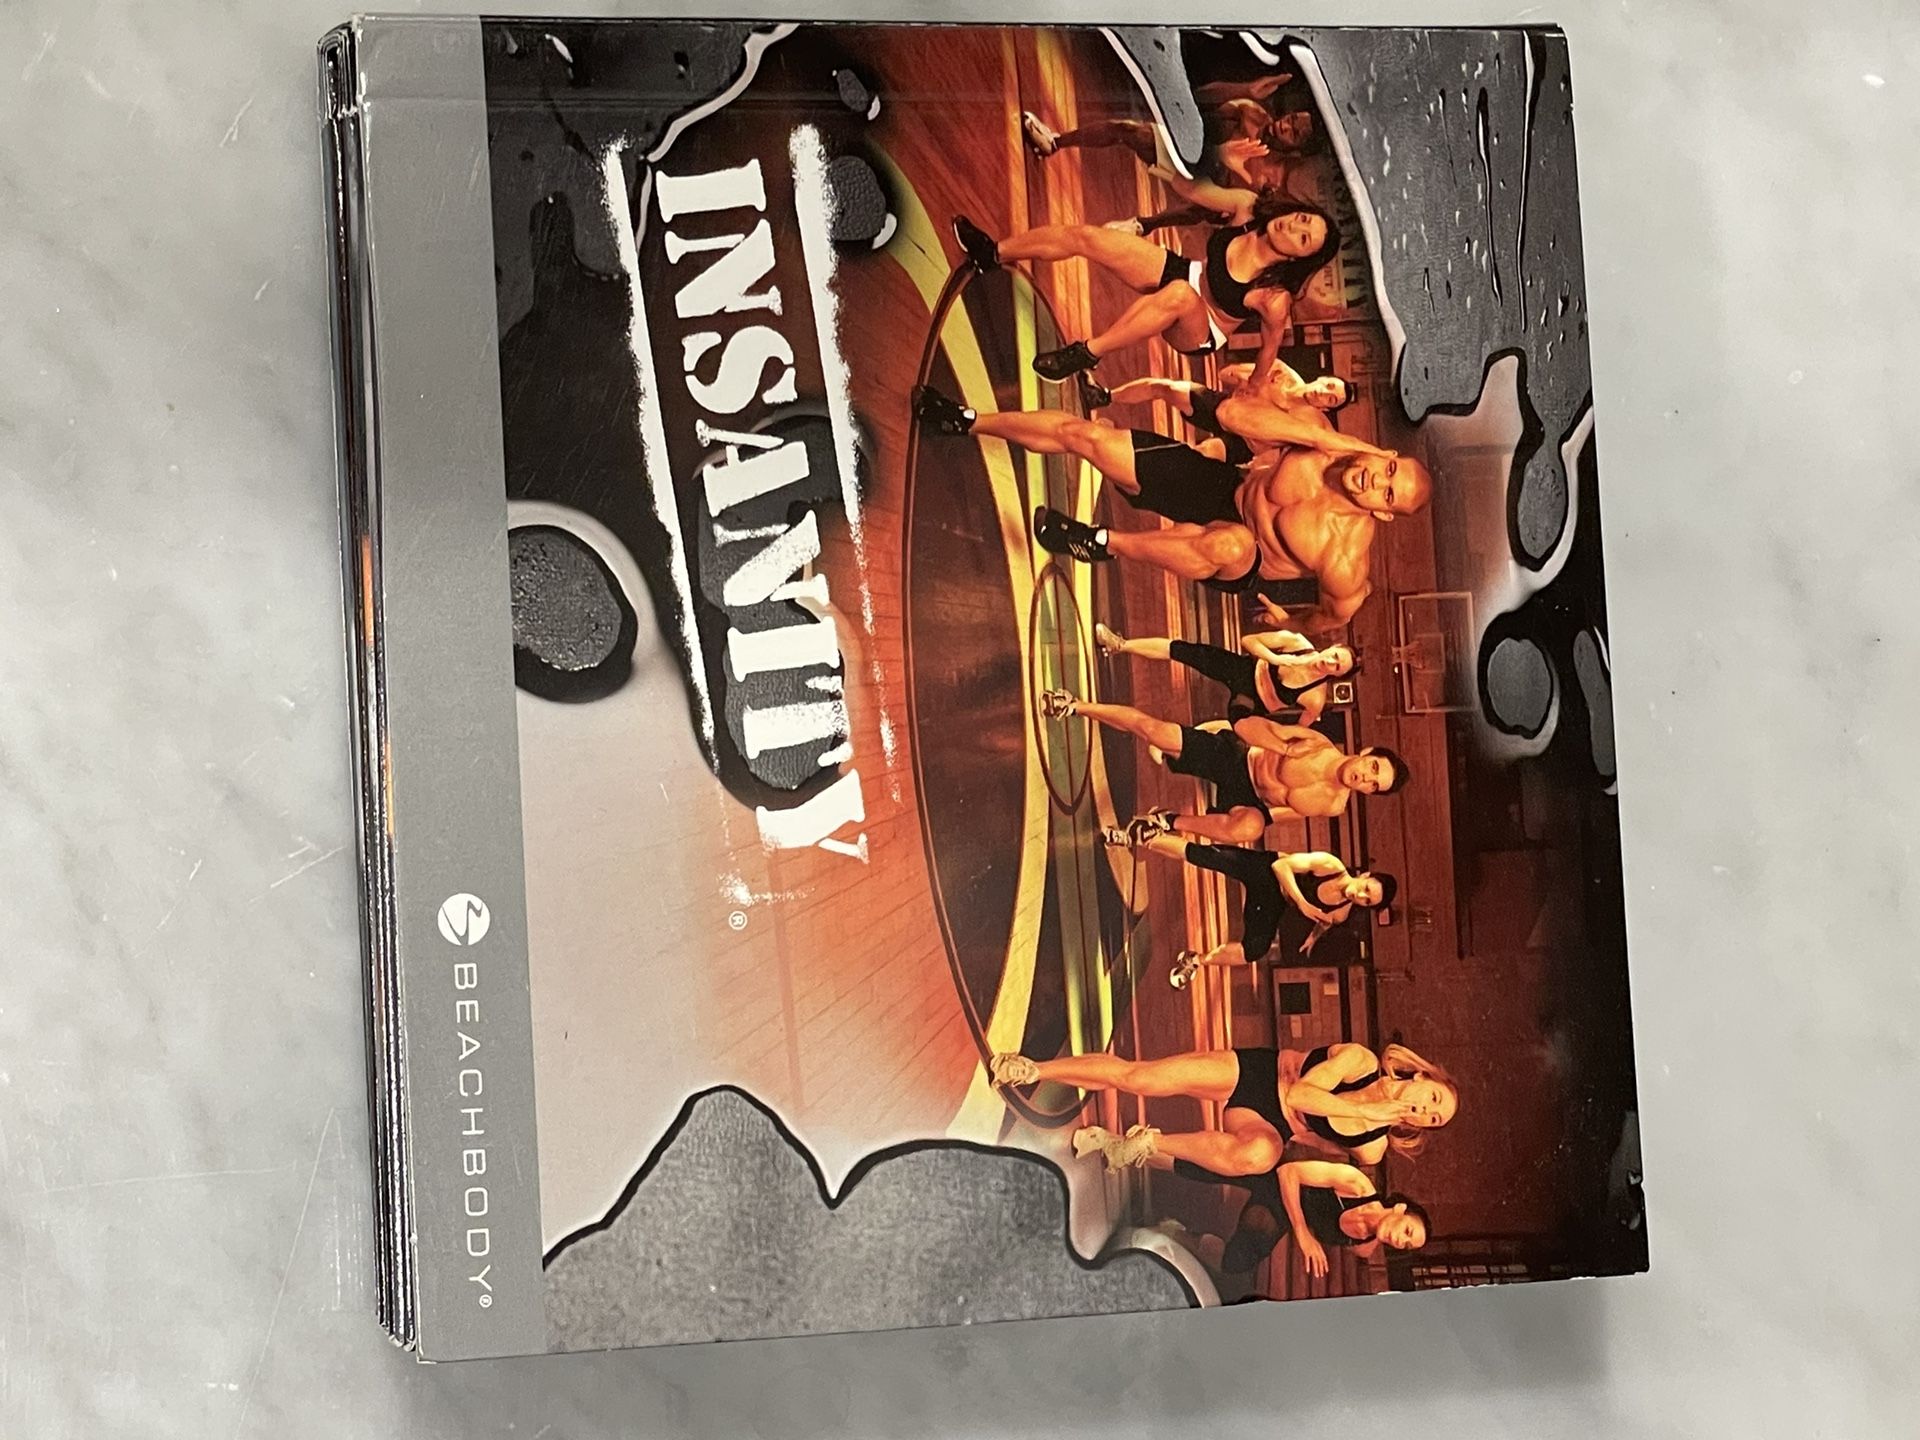 Insanity Workout 10 DVD Set New Unused Exercise Fitness